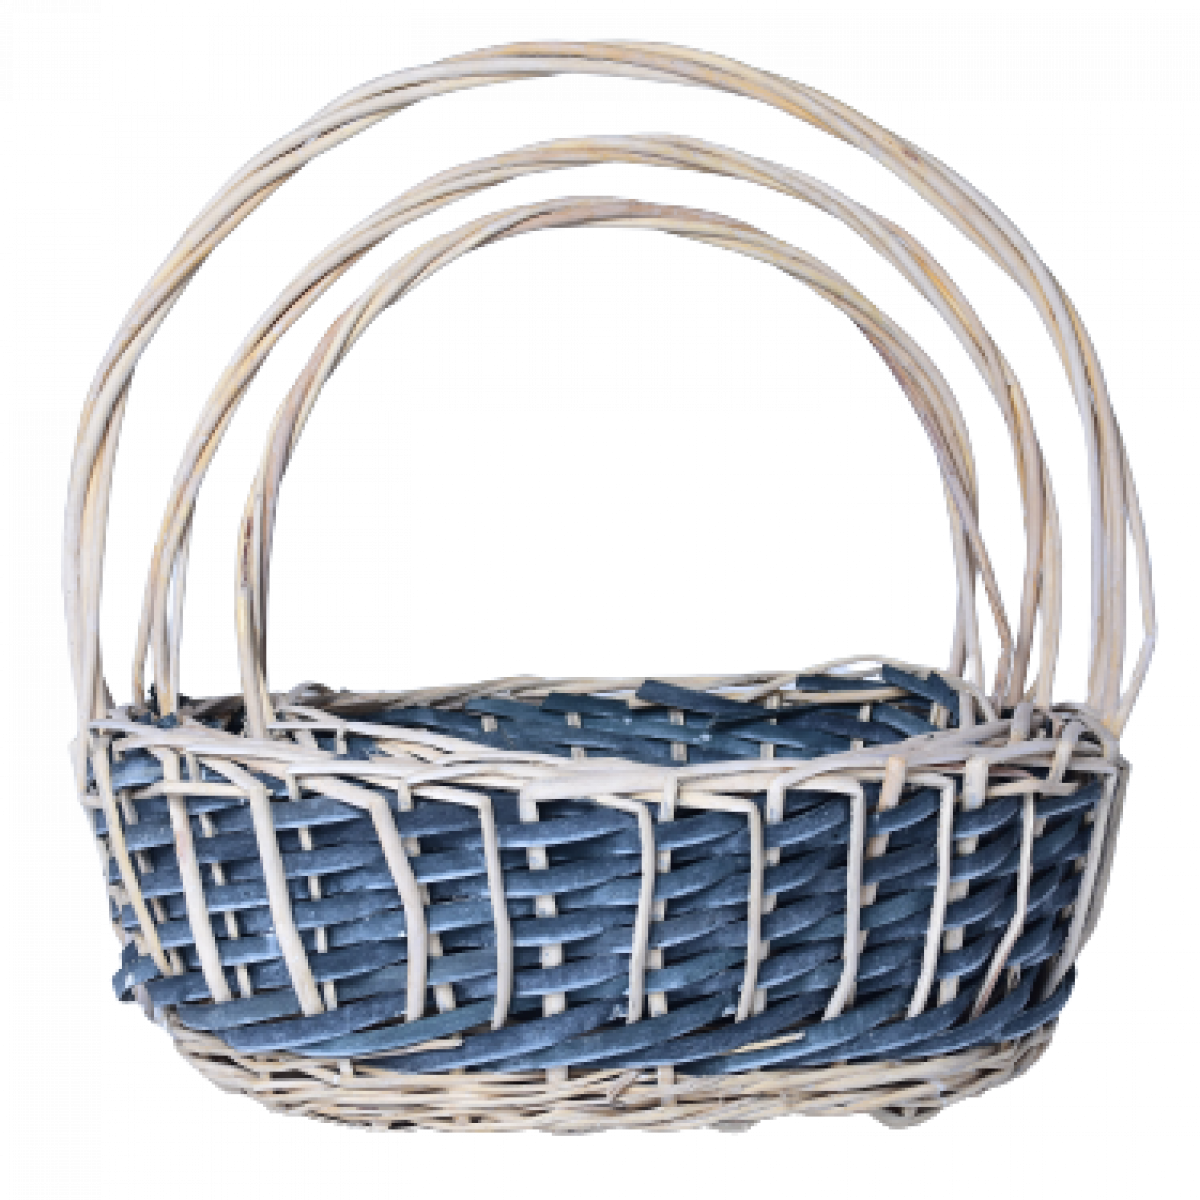 5517 London Oval Nest Graphite Black Willow Basket with Handle (Set of 3)